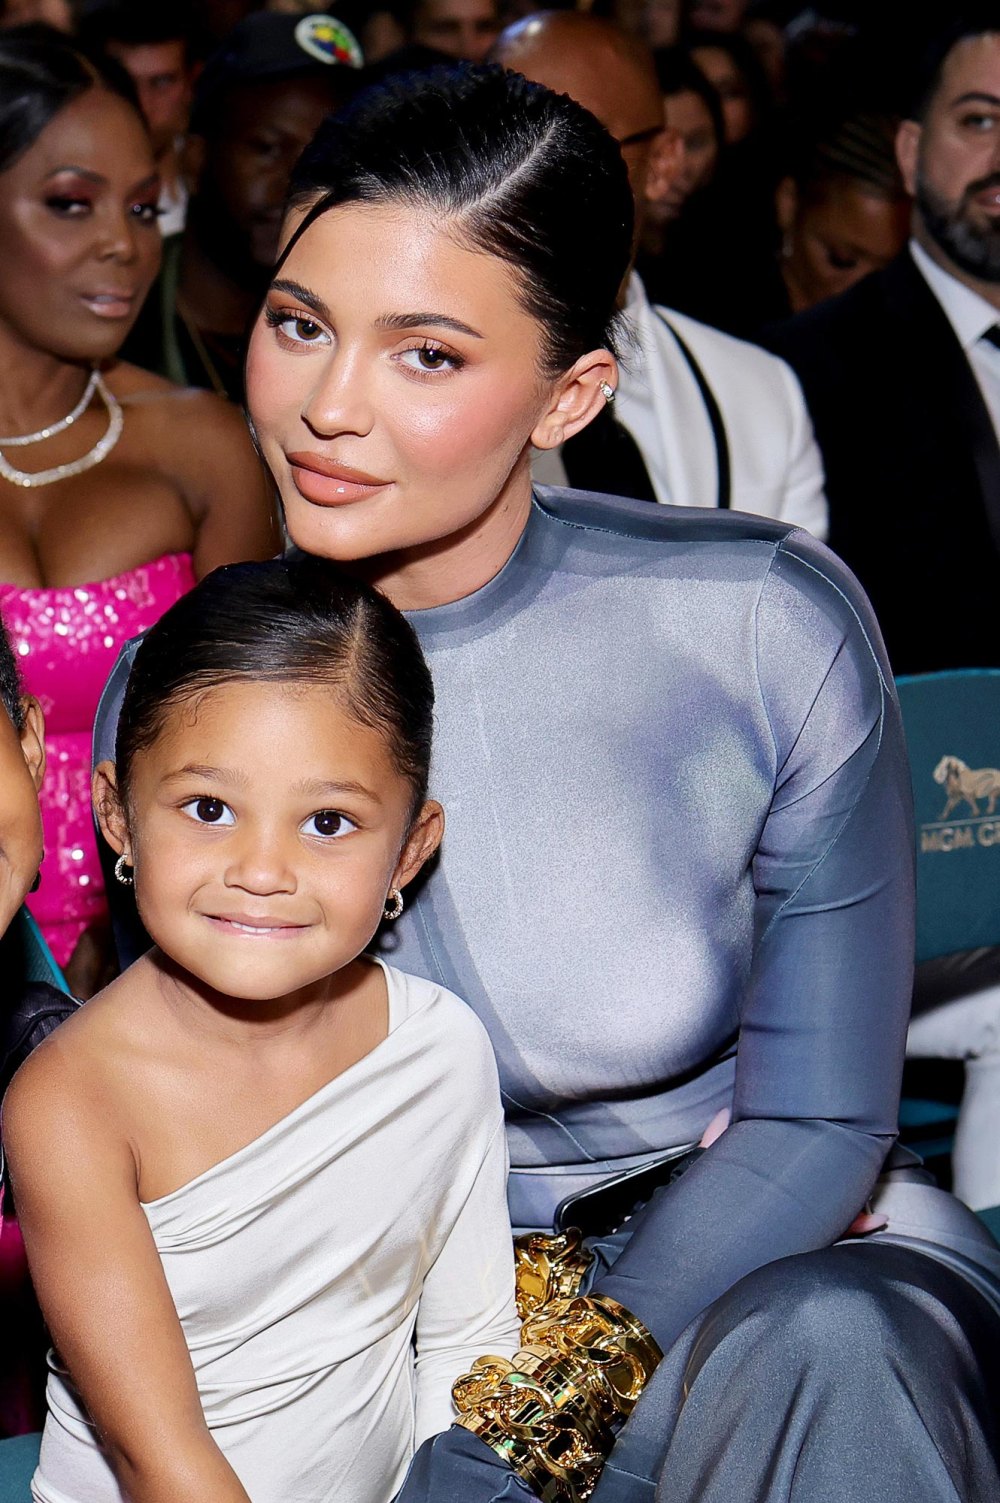 Kylie Jenner Says She Never Hired Security Until She Got Pregnant With Daughter Stormi 507